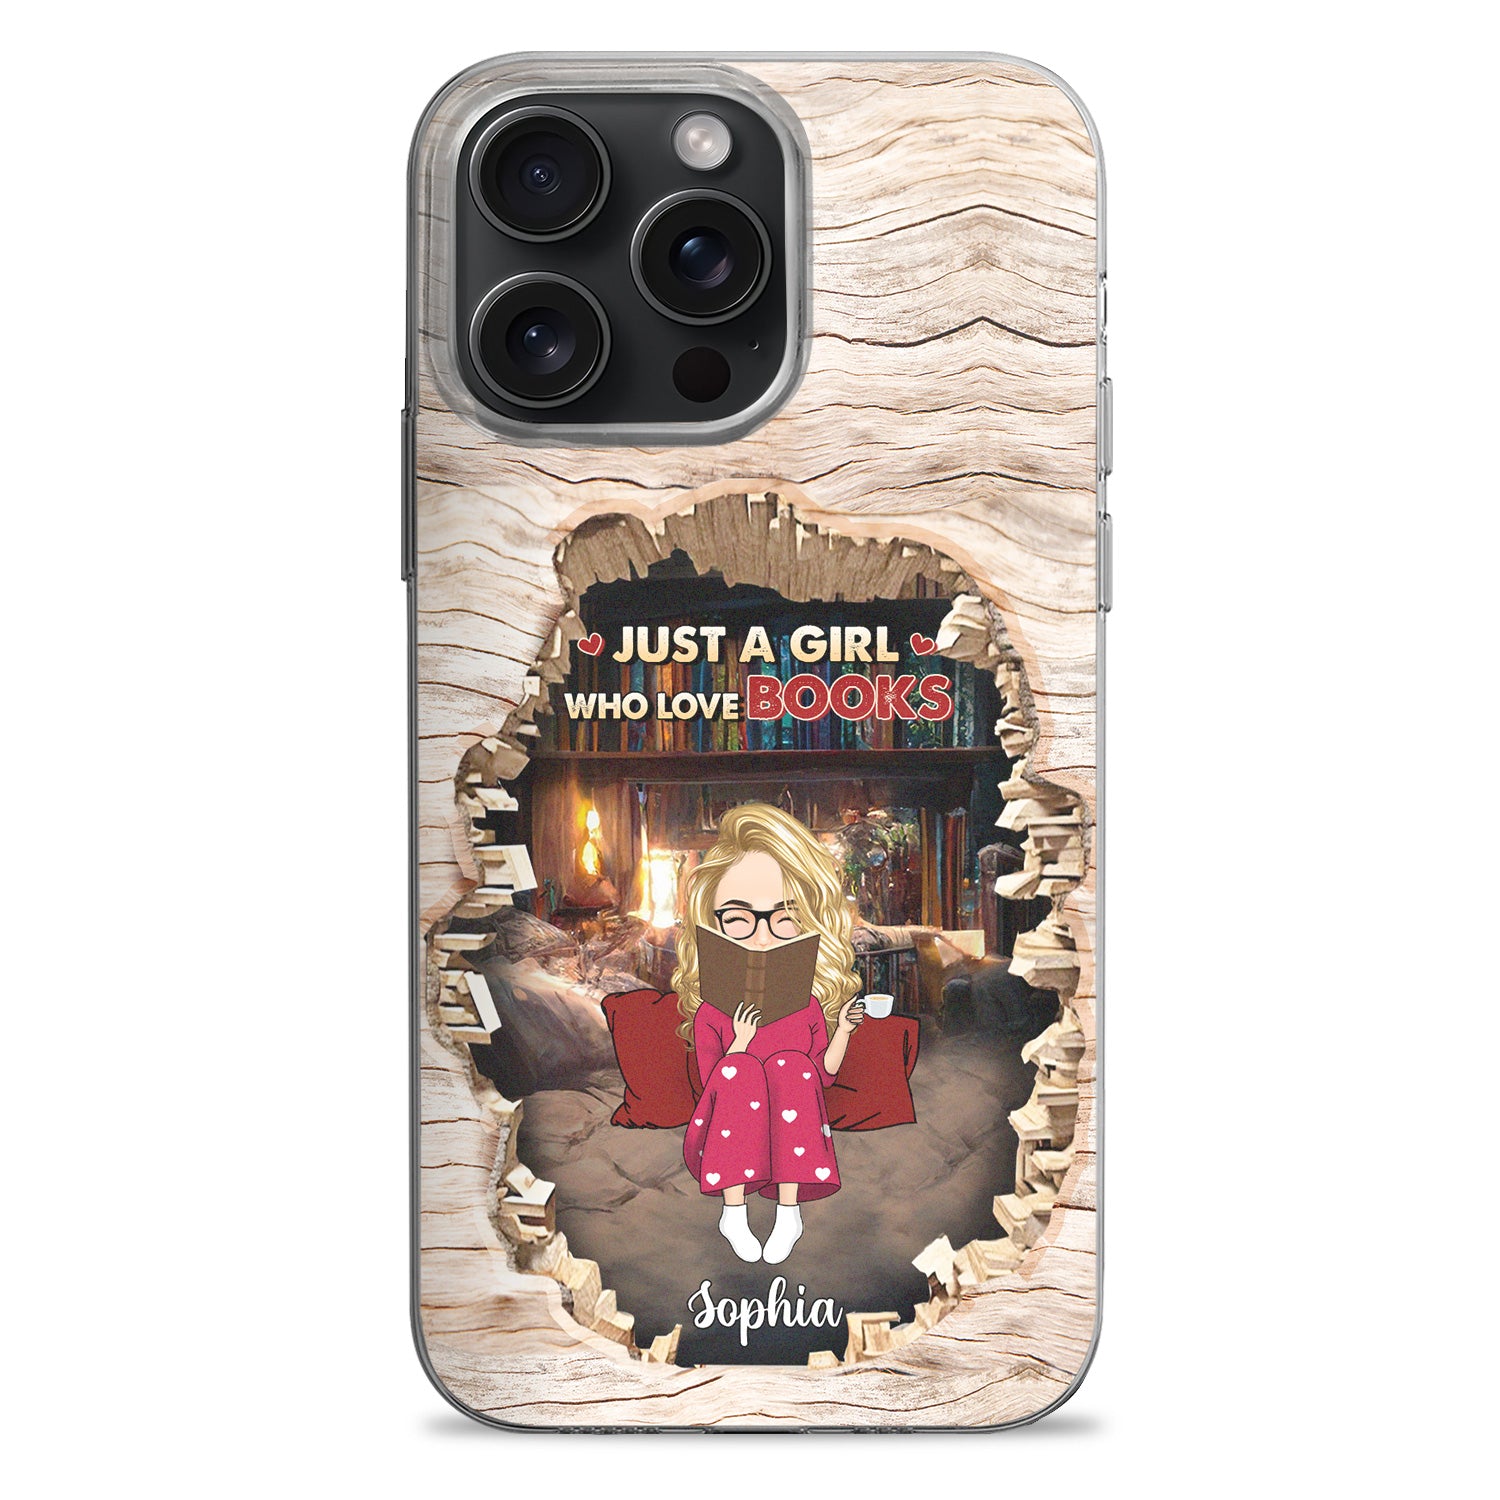 3D Books Library Cave Reading Just A Girl Who Loves - Gift For Book Lovers - Personalized Clear Phone Case